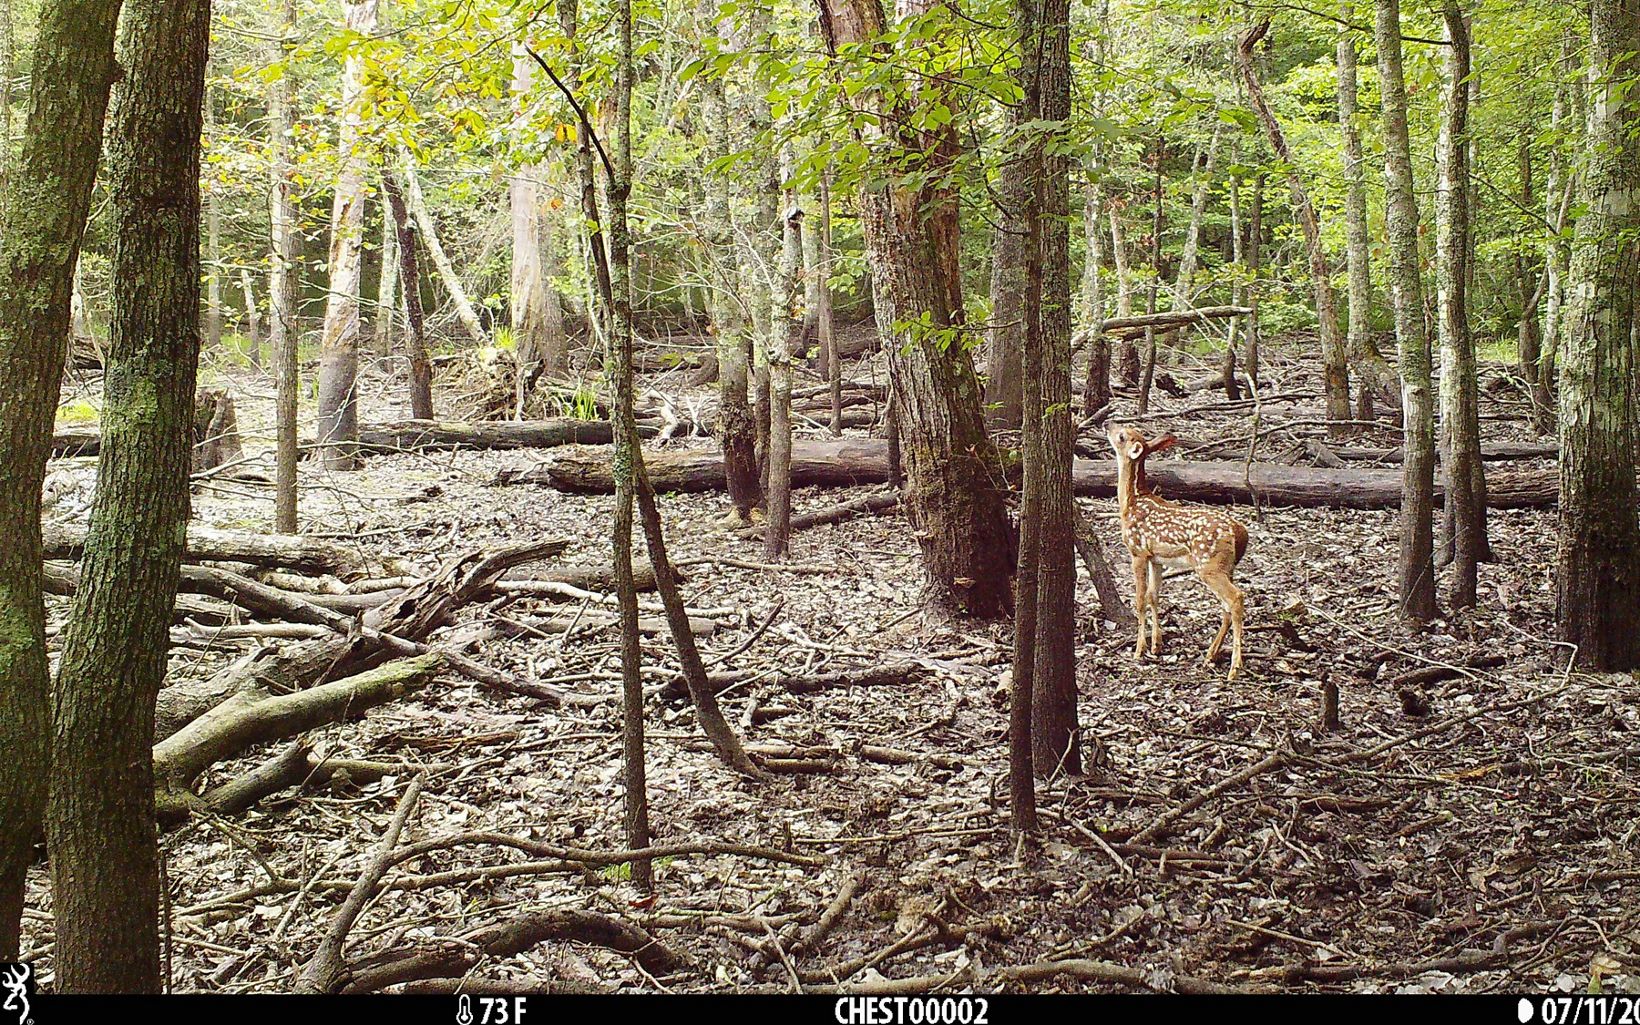 A fawn explores a wooded area.